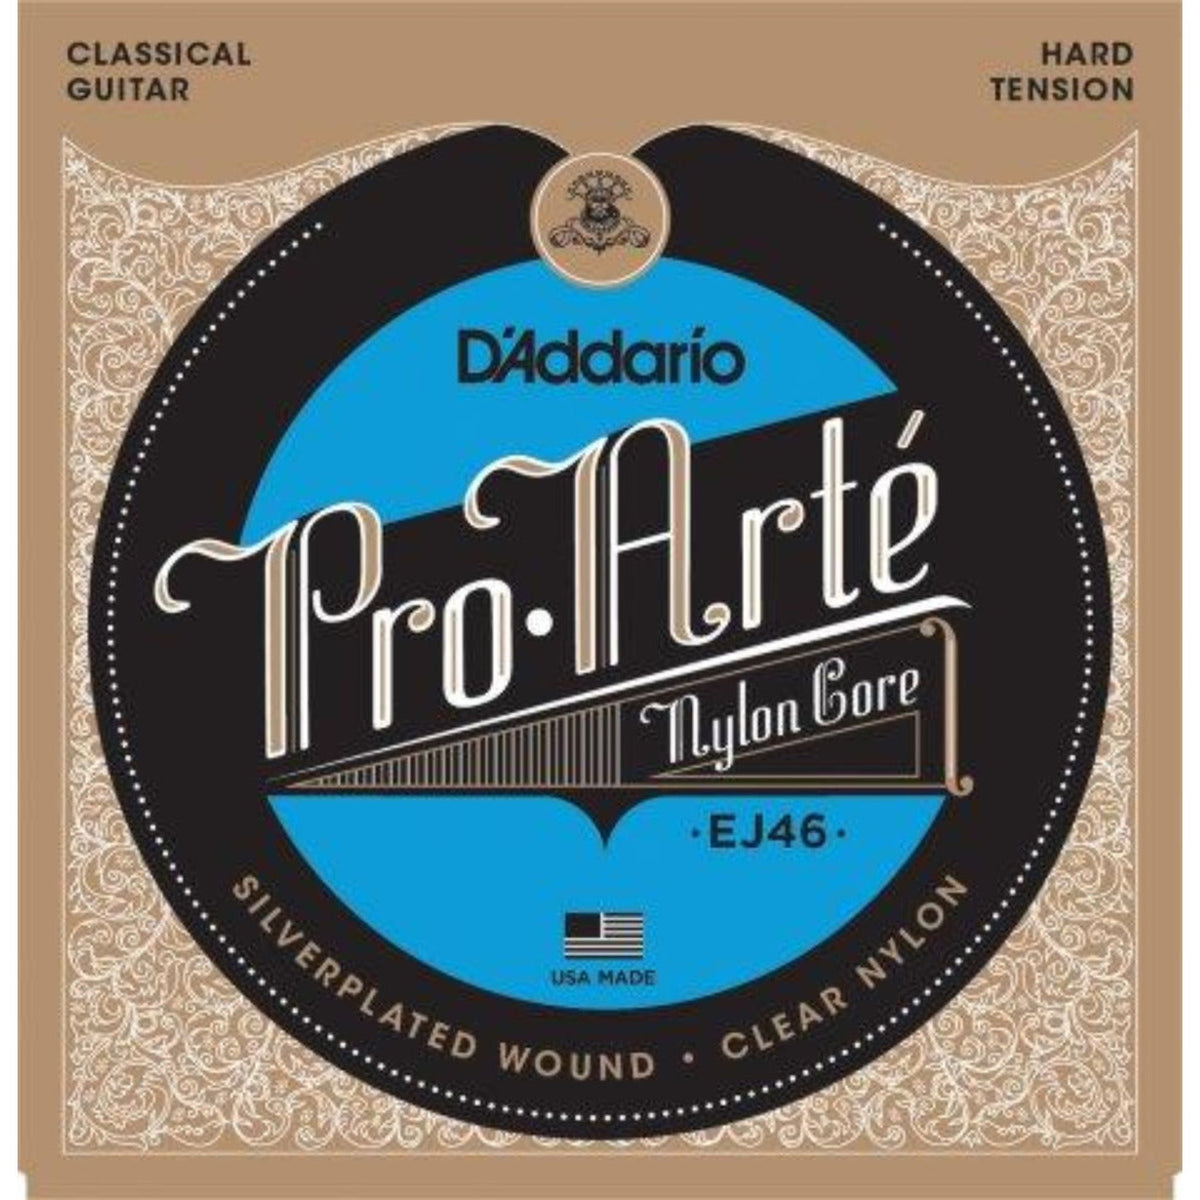 D&#39;Addario EJ46 Classical Guitar String, hard tension, is a popular choice for its rich tone, increased resistance and strong projection. 